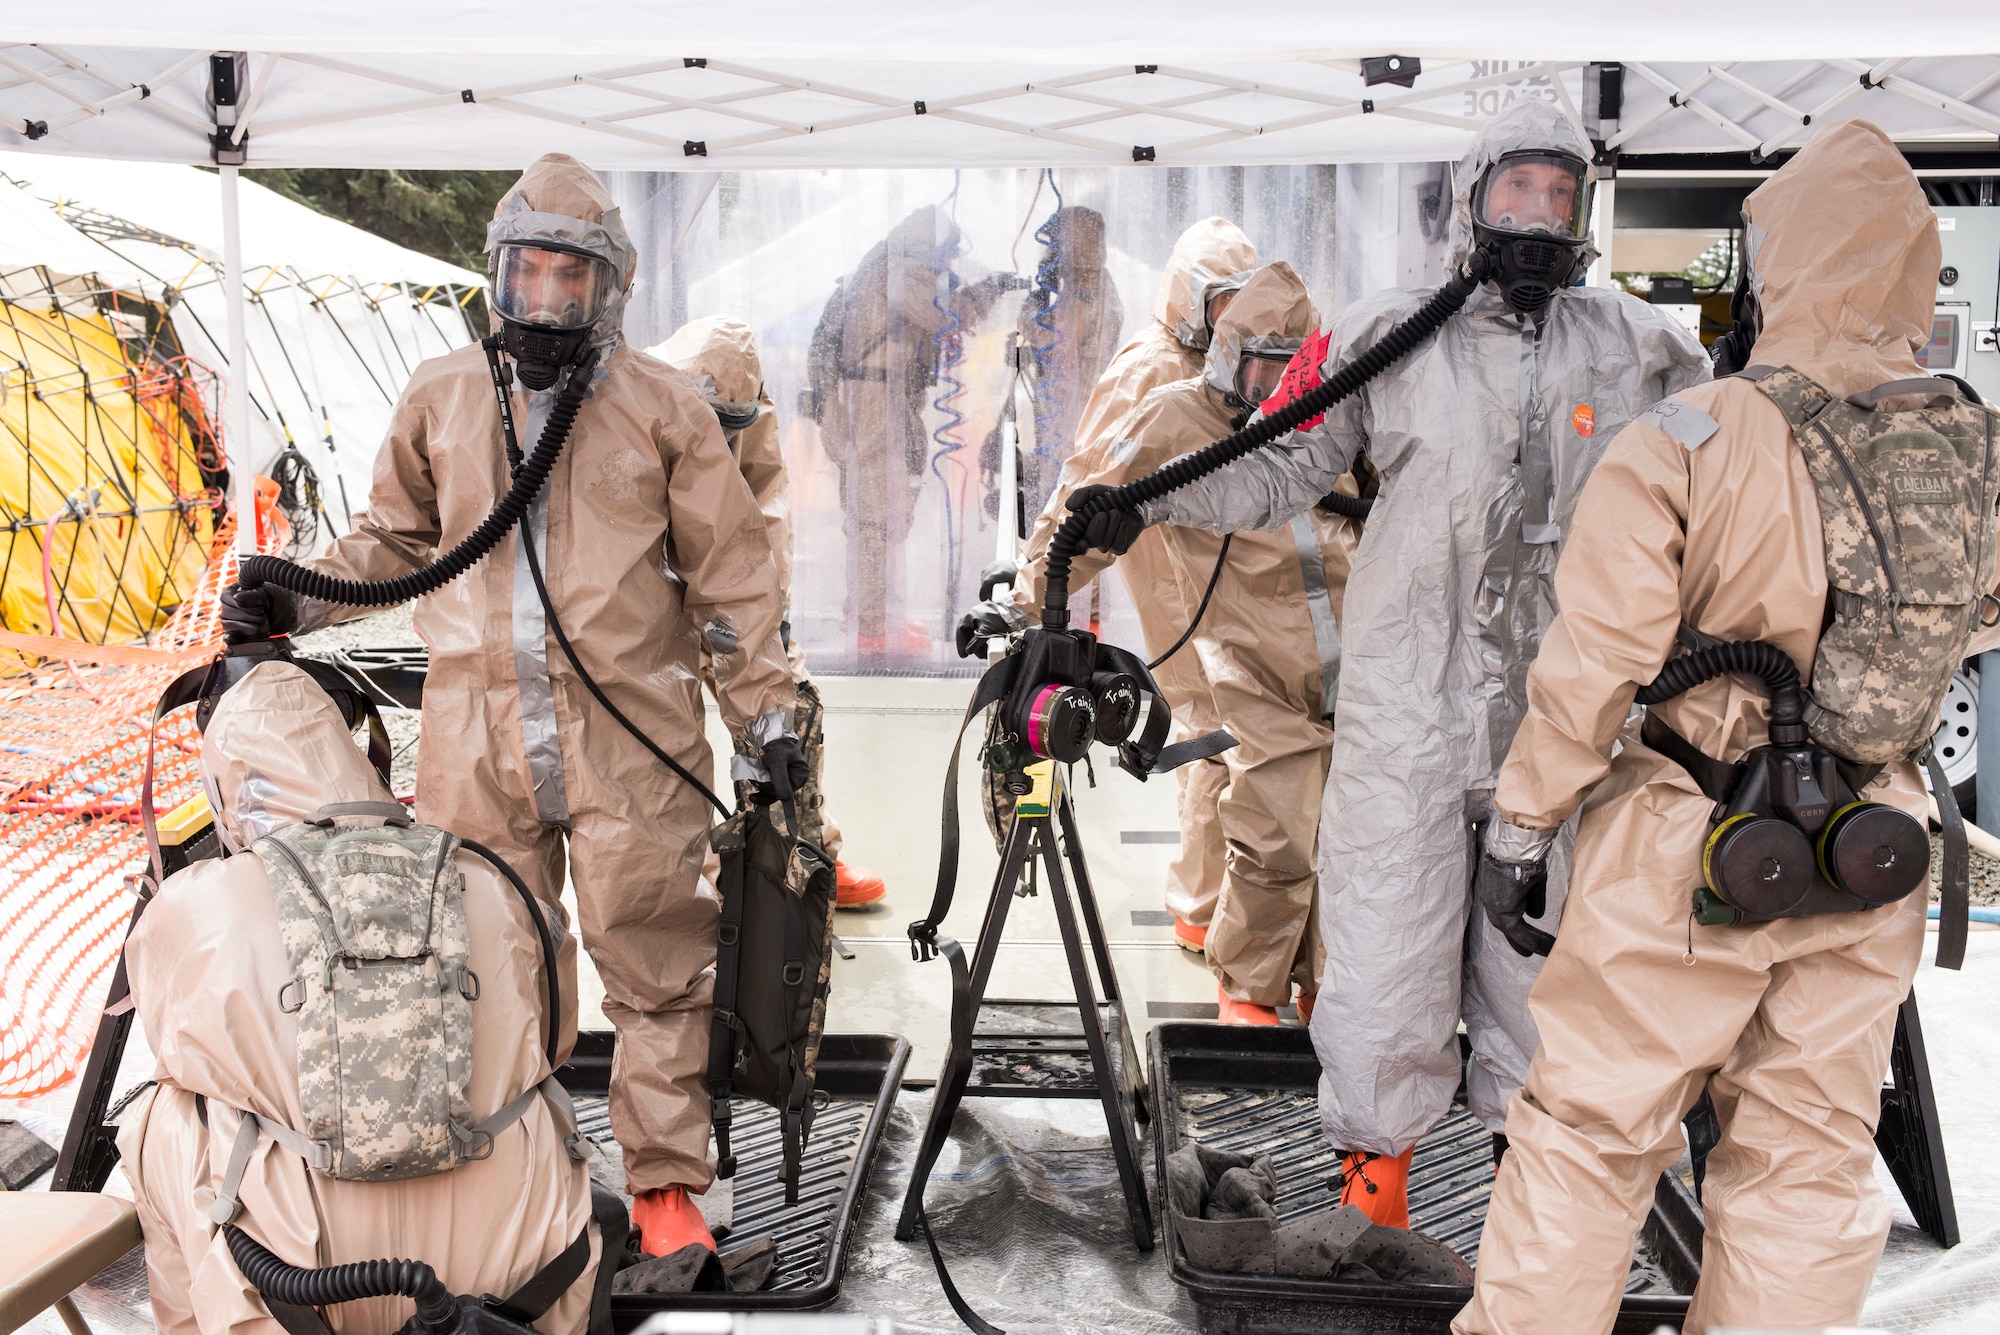 Colorado Army National Guard Soldiers move through the decontamination tent, where they are sprayed down thoroughly and checked for any signs of chemical, biological, radiological or nuclear residual, in an effort to train for a joint exercise evaluation (EXEVAL), where they'll be evaluated for war time readiness at Camp Rilea, Warrenton, Oregon, on Aug. 3, 2016. The EXEVAL scenerios changed every day, giving Soldiers and Airmen the opportunity to practice in multiple atmospheres with various personnel. (U.S. Air National Guard photo by Staff Sgt. Bobbie Reynolds) 